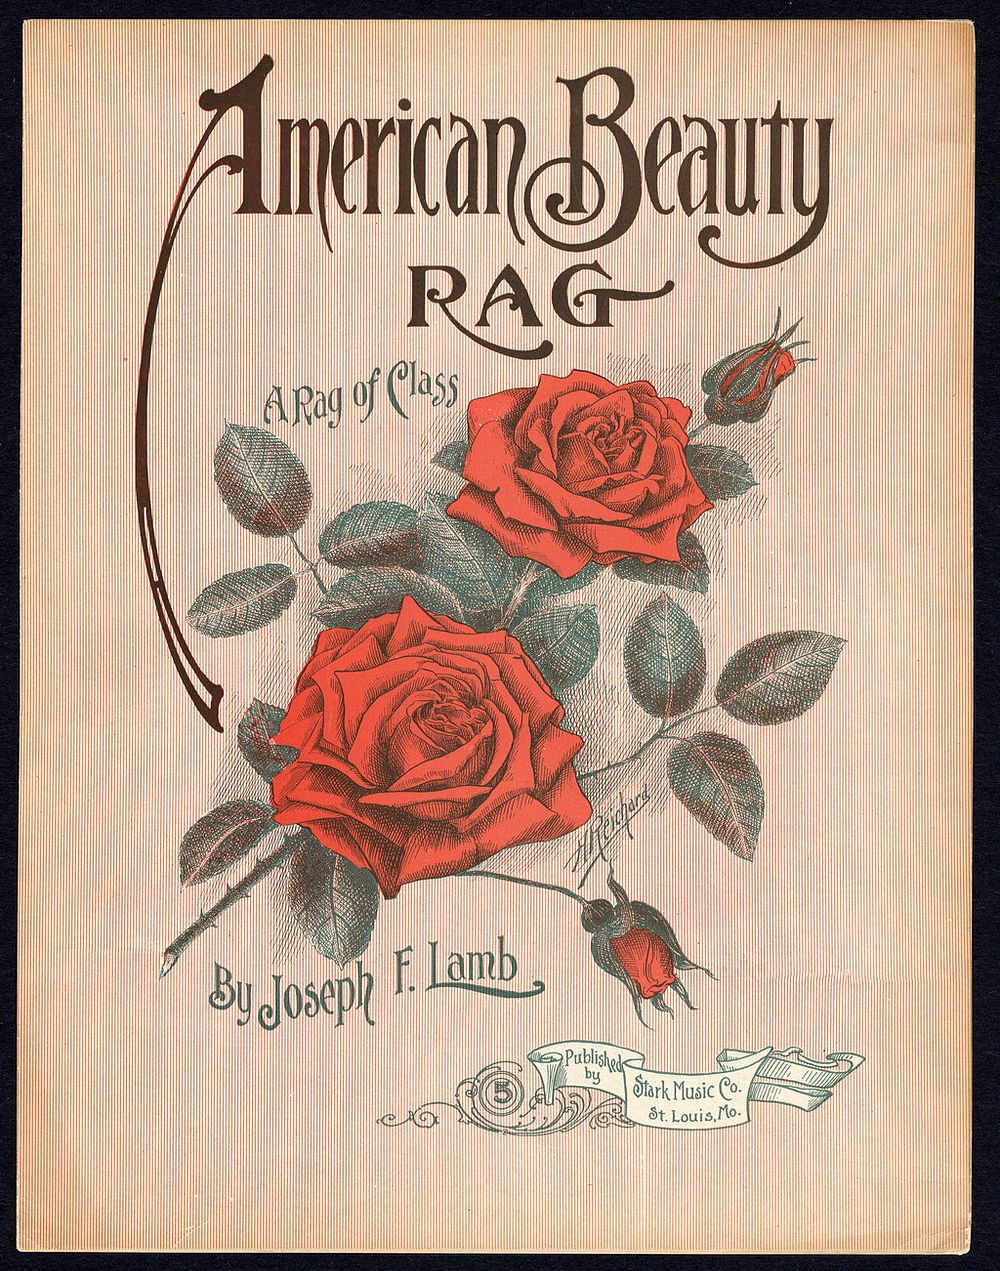 "American Beauty Rag" (sheet music) Page 1 of 5